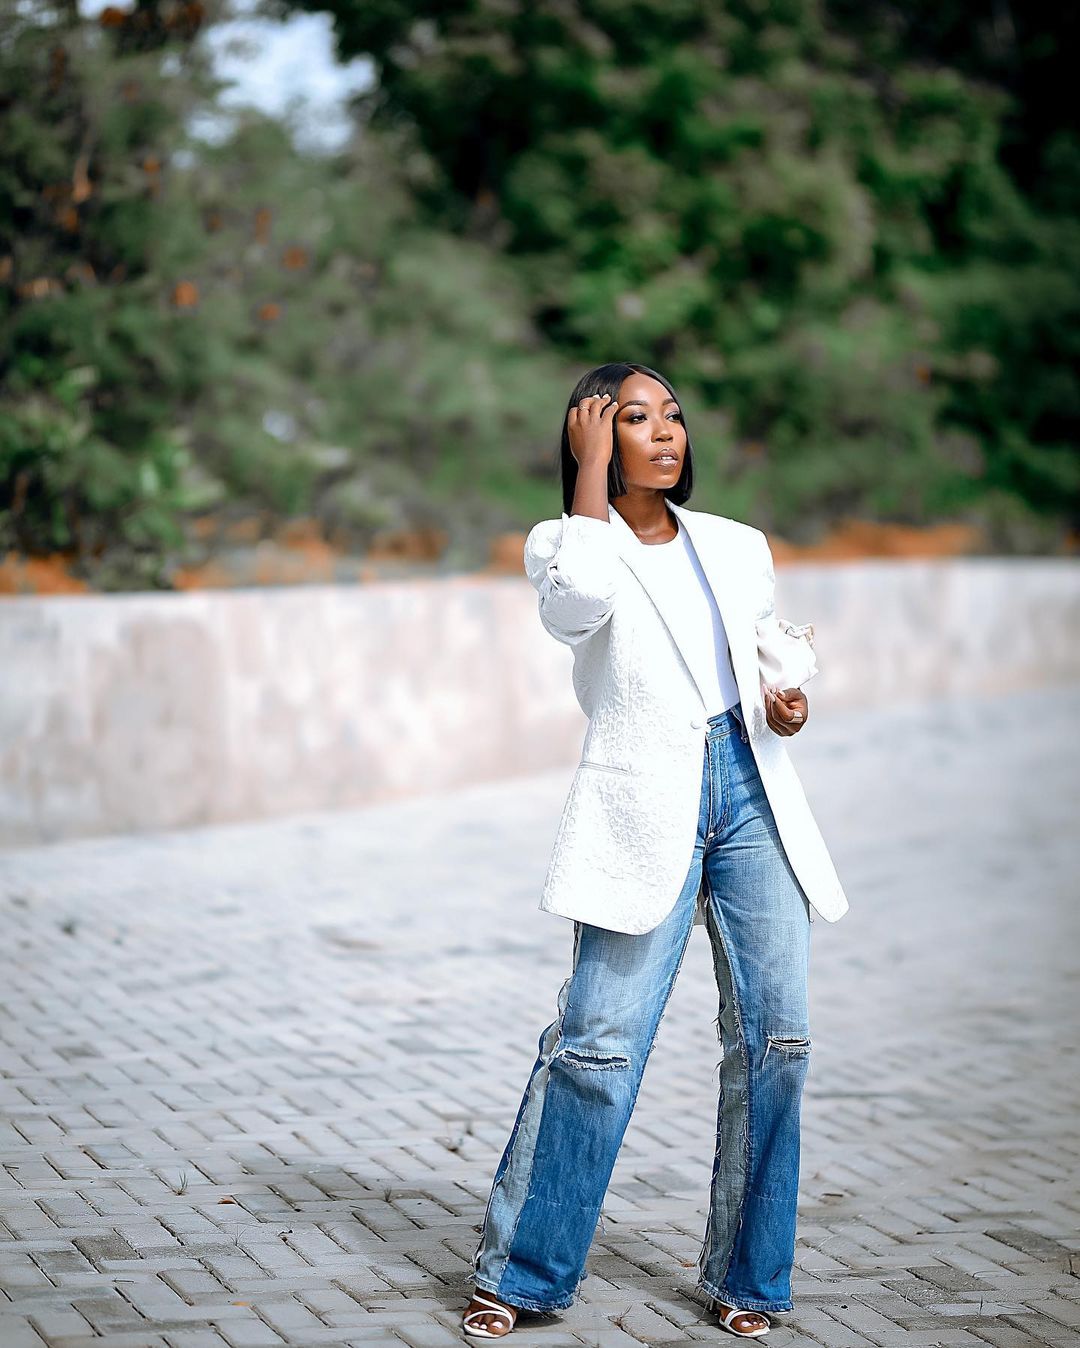 HOW TO STYLE WIDE LEG JEANS